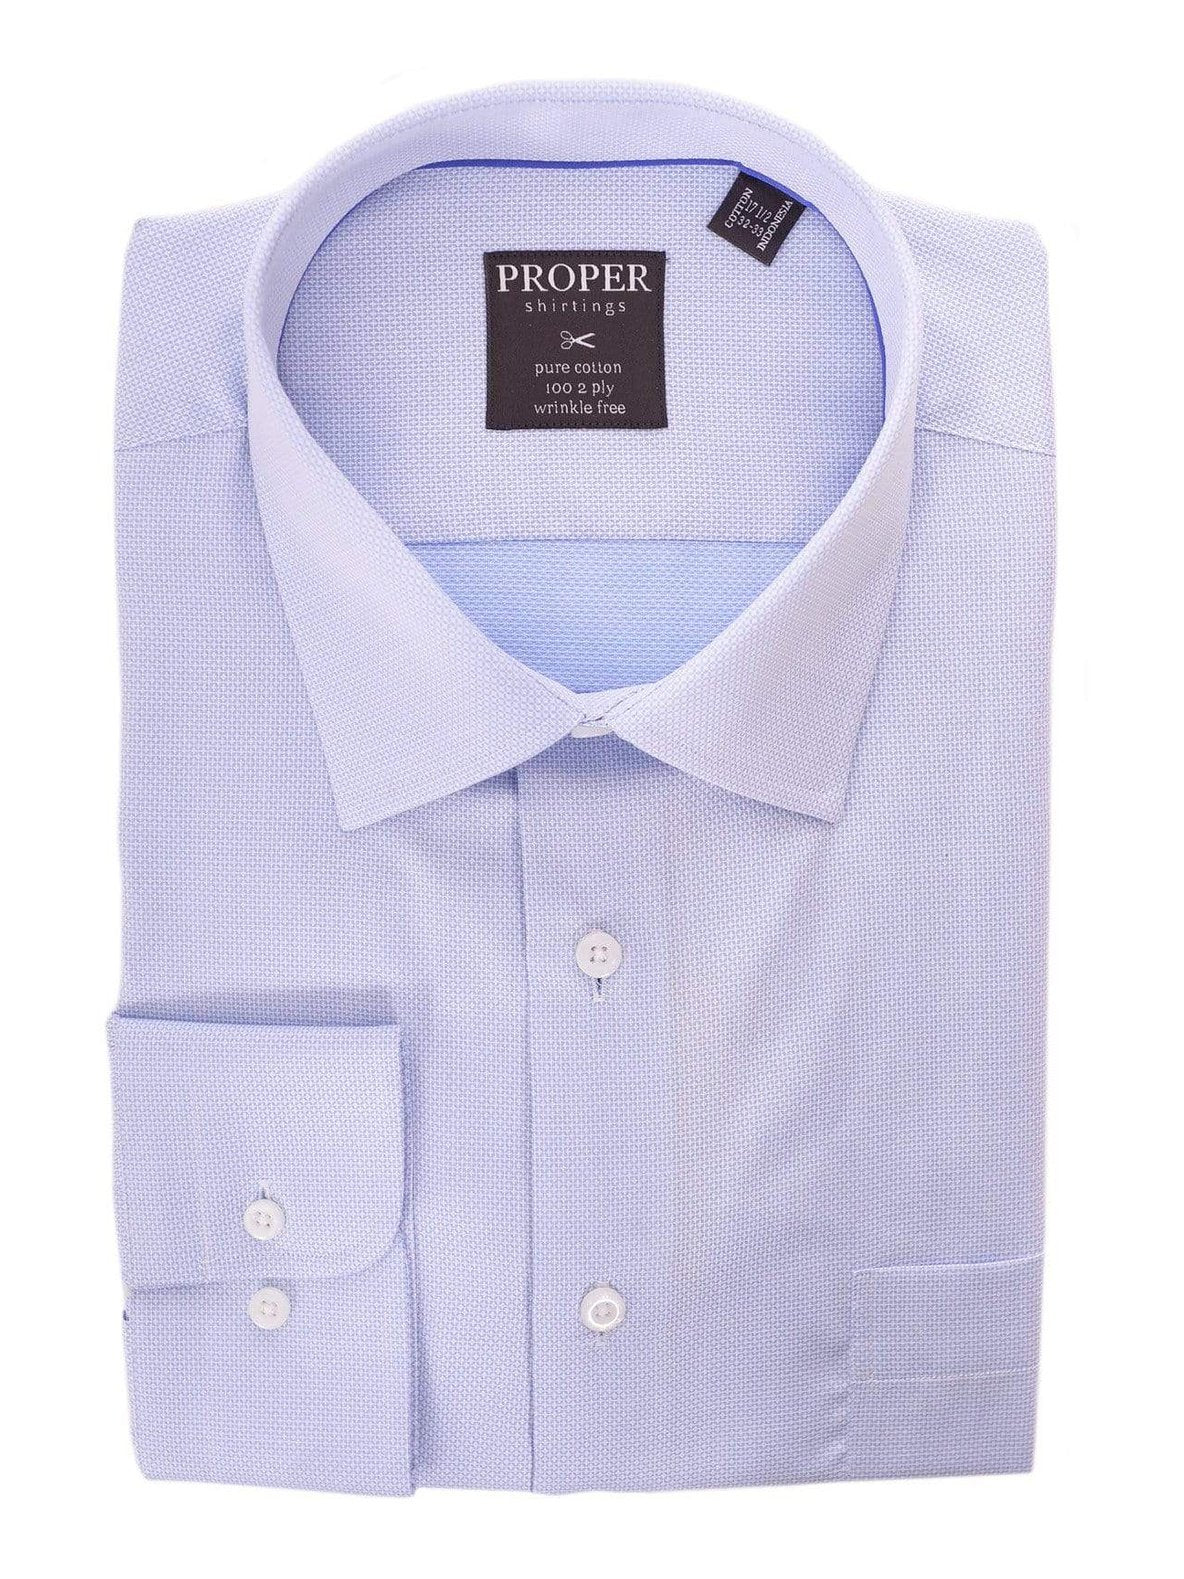 Proper Shirtings SHIRTS 17 36/37 Classic Fit Blue Textured Spread Collar 100 2ply Wrinkle Free Cotton Dress Shirt